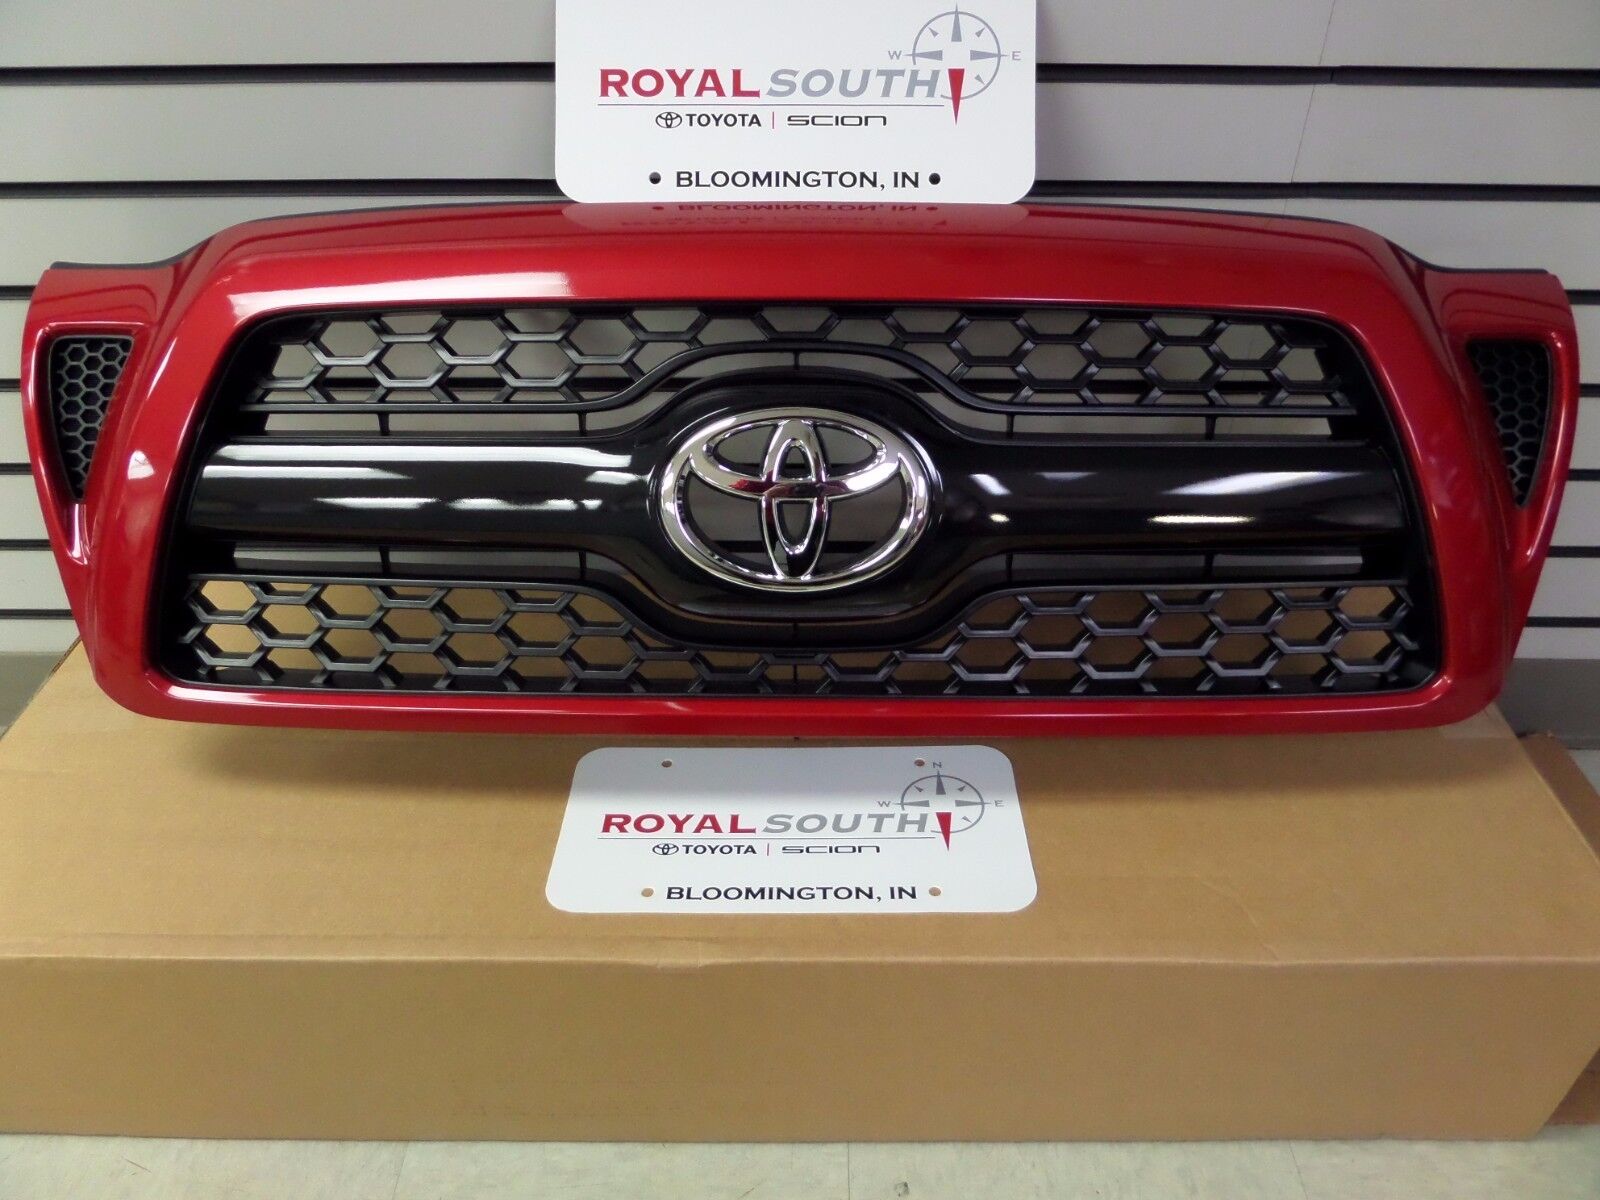 Toyota Tacoma Sport Barcelona Red 3R3 Honeycomb Grille Genuine OEM OE